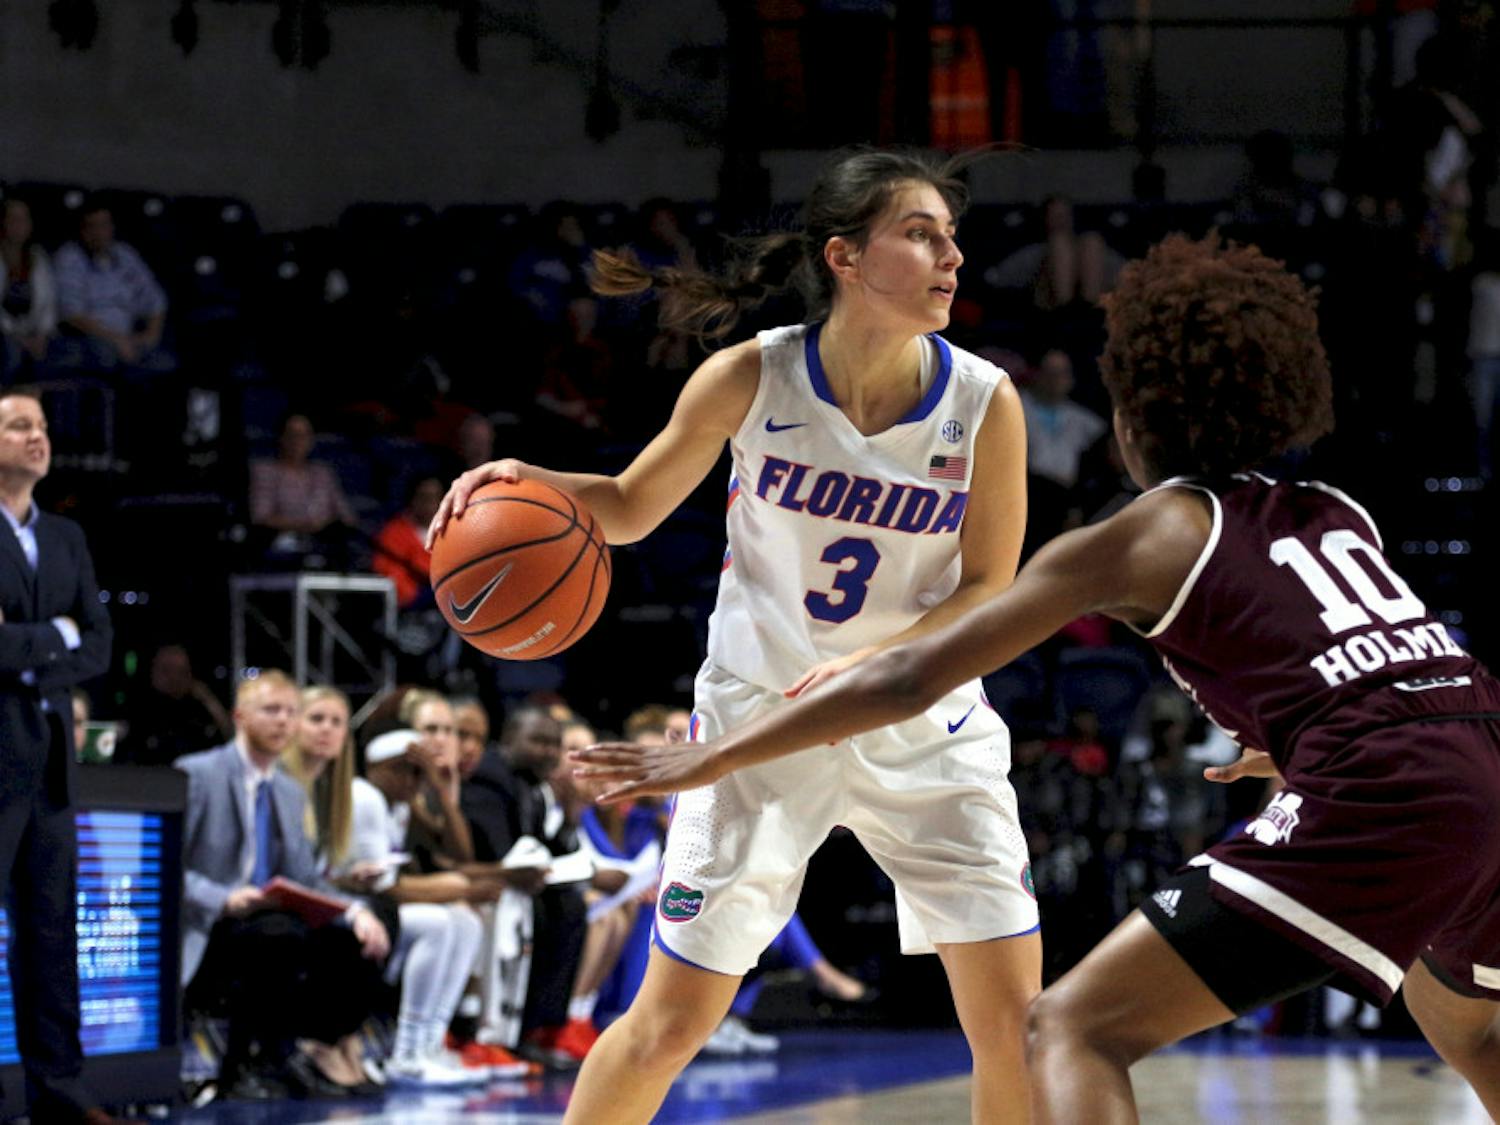 Guard Funda Nakkasoglu led the Gators in scoring with 43 points through the first two games. She's the only UF player shooting over 50.0 percent from the field (57.1). 